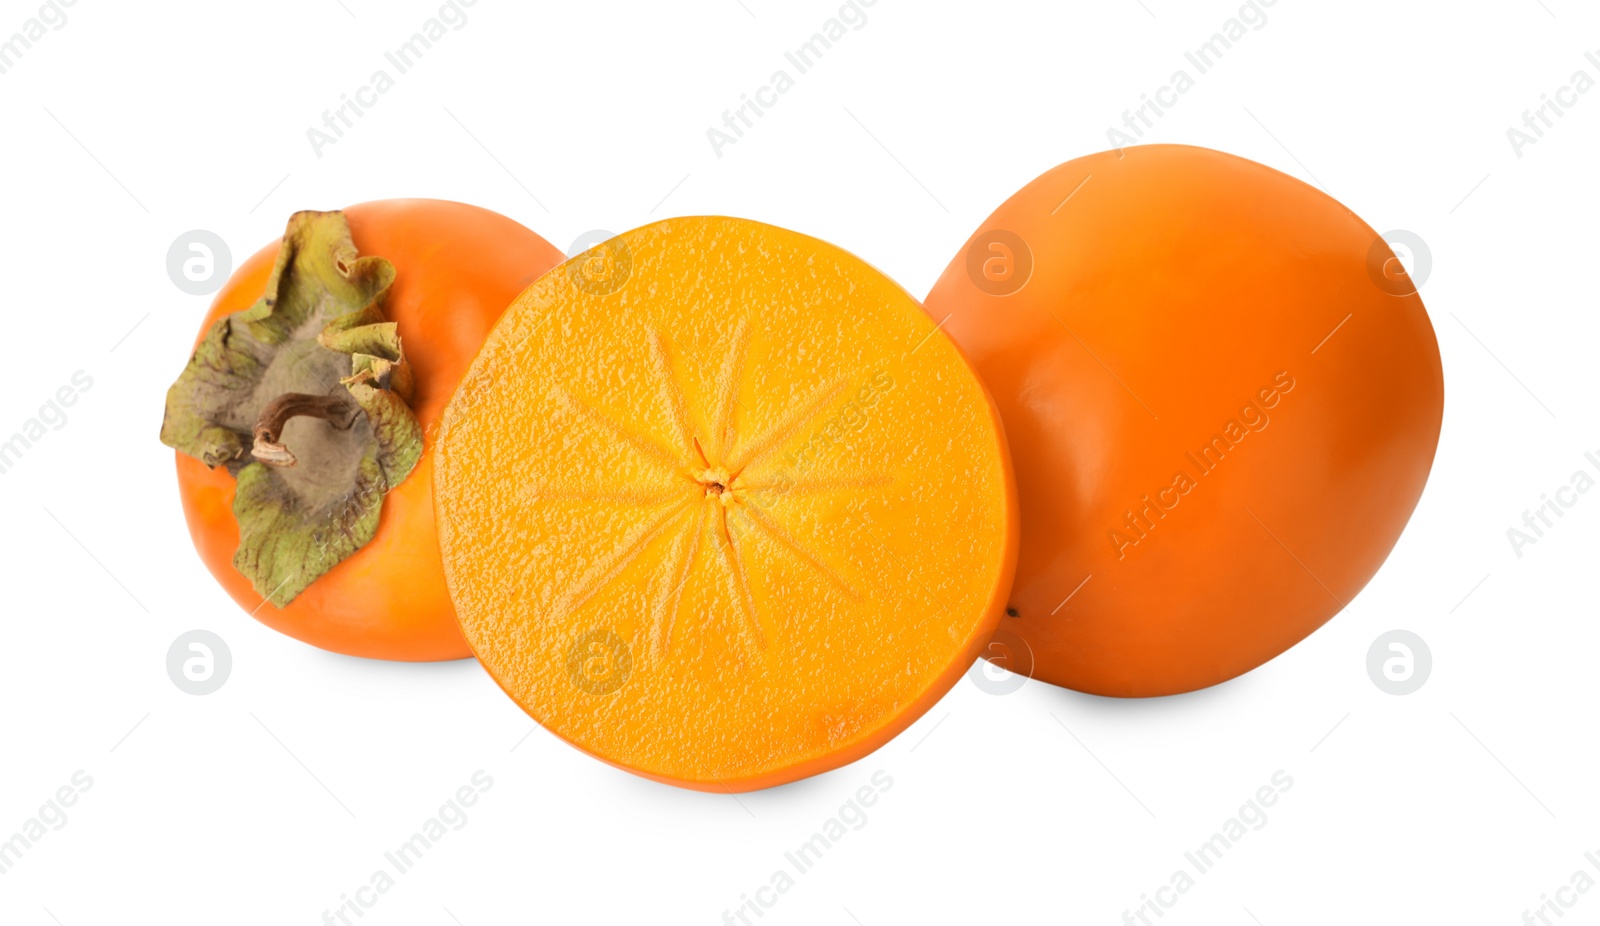 Photo of Whole and cut delicious ripe juicy persimmons on white background